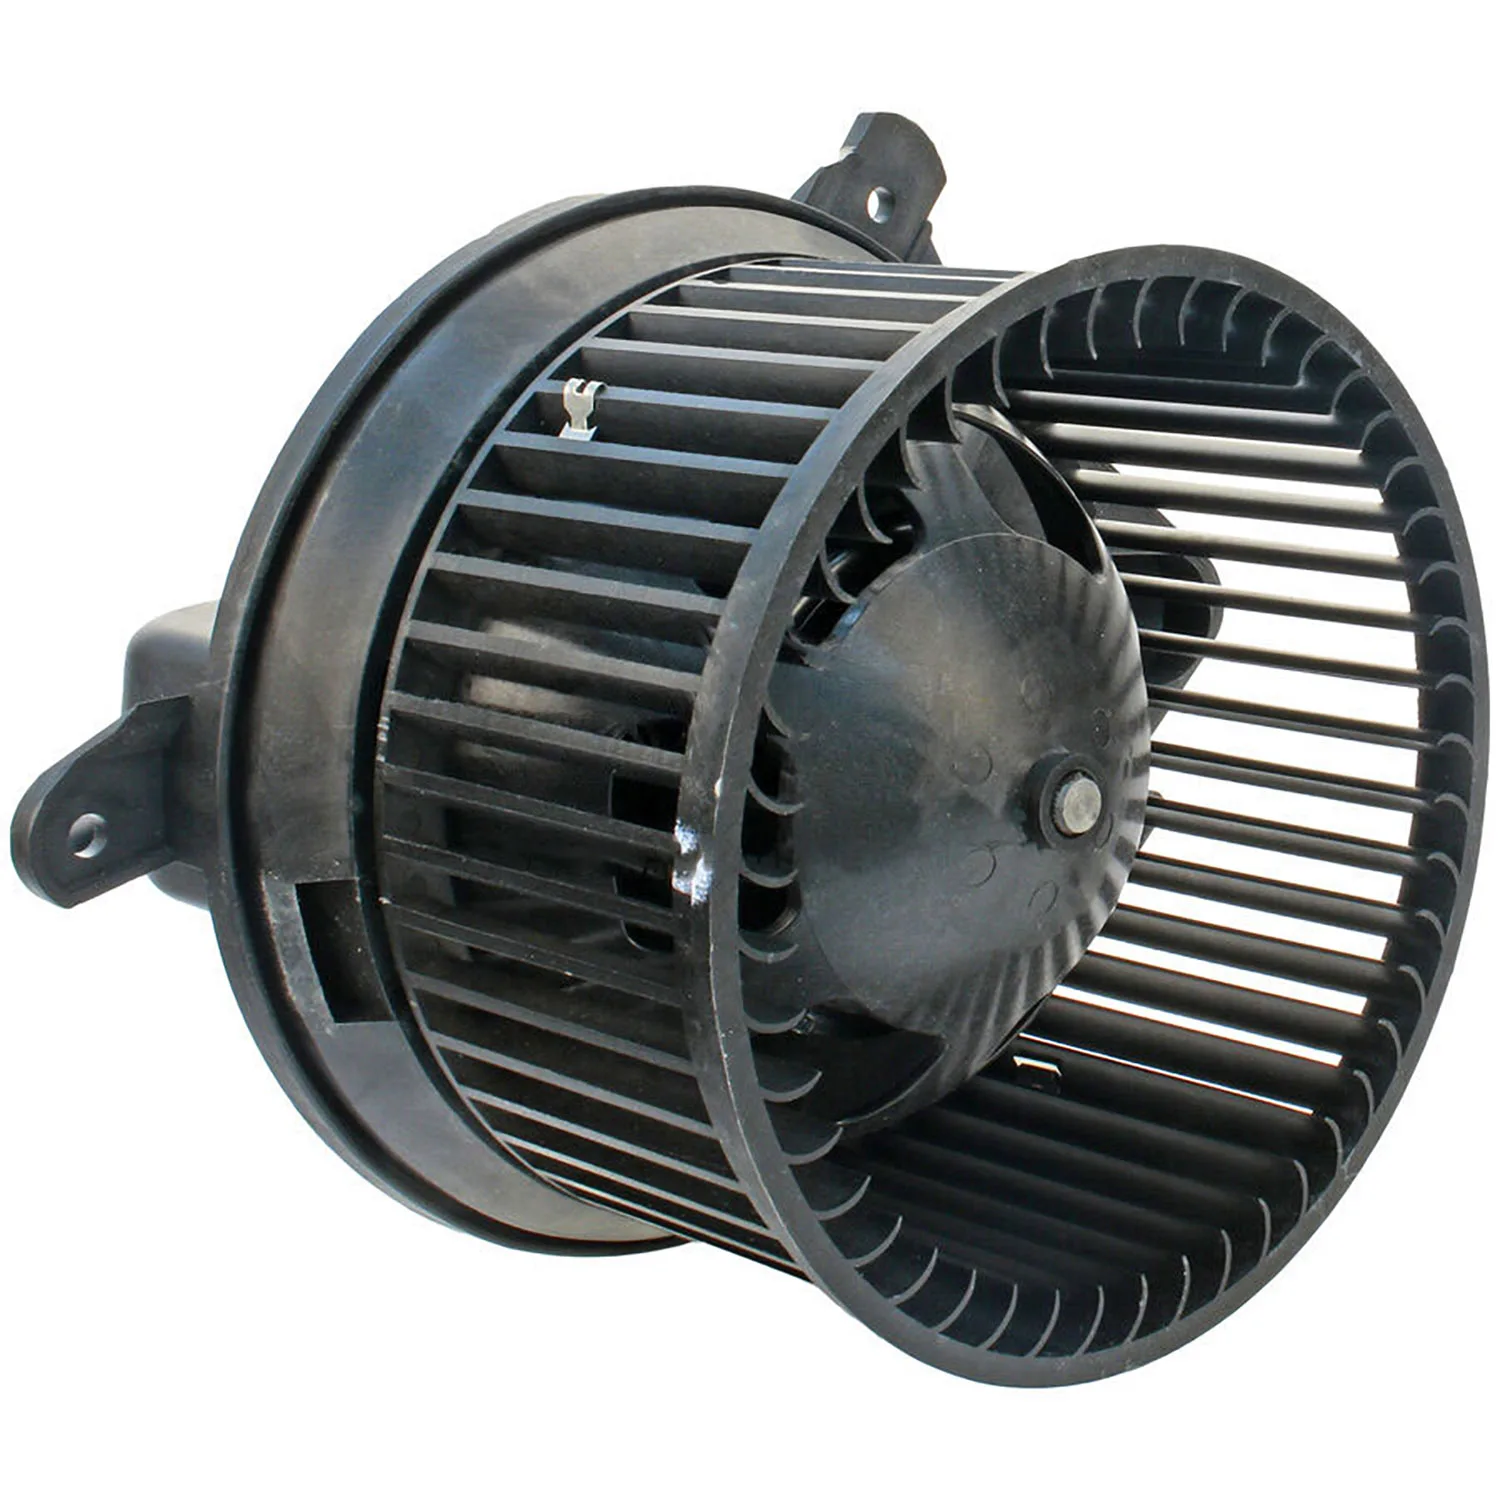 

Air Conditioning Fan AC A/C Blower Motor FOR ISZ 12V MZZ0023 6441S0 MZZ0023GS MZZ0023YD 715053 202N10127Z